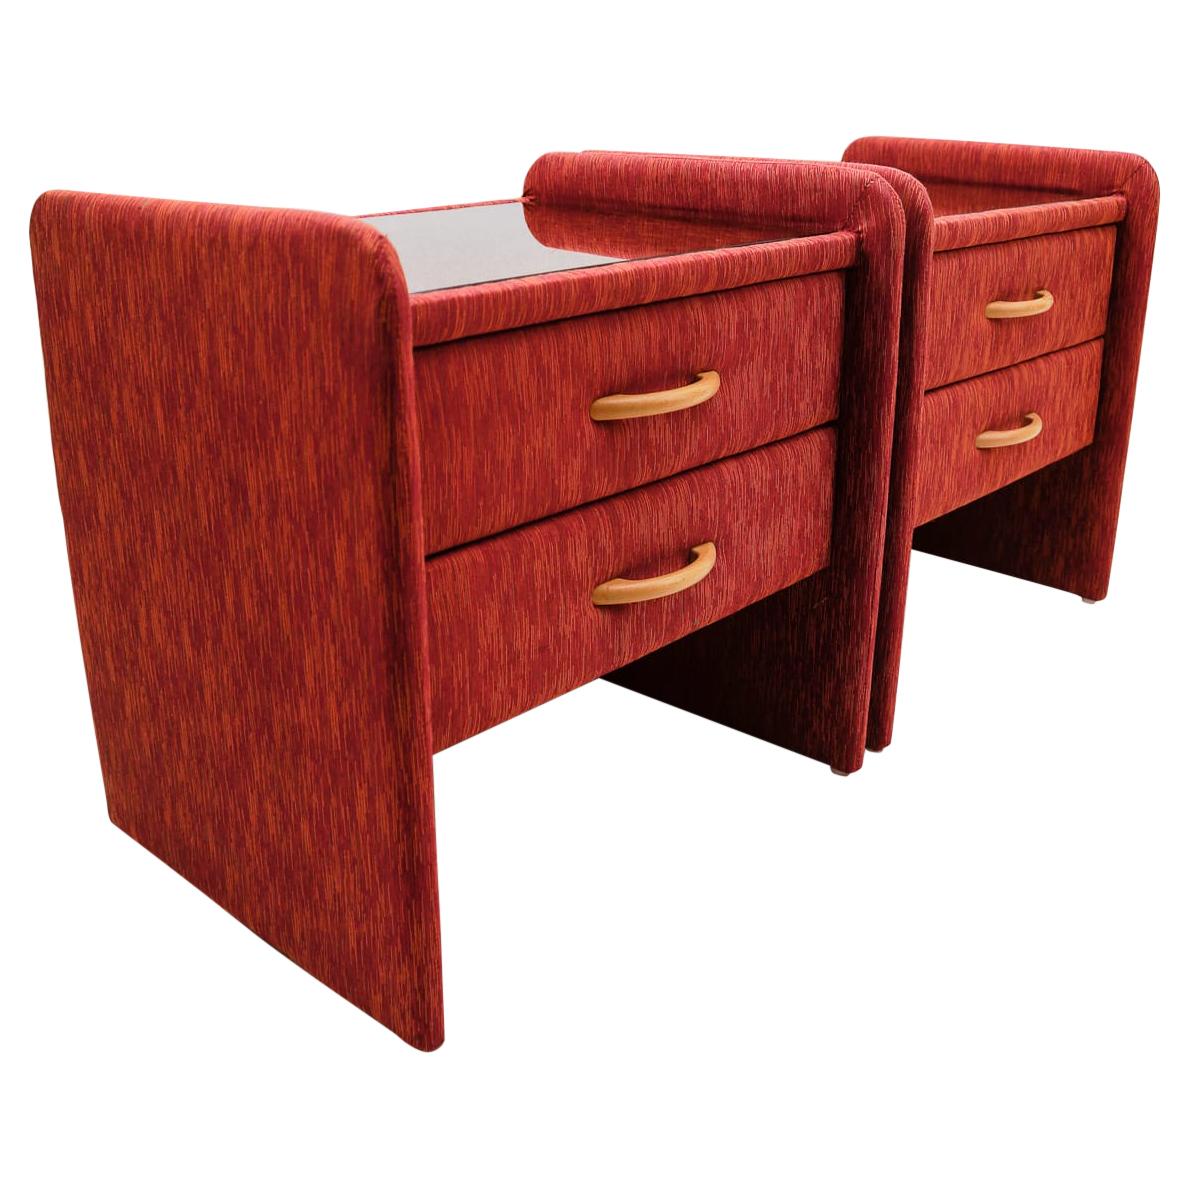 Two Fabric Upholstered Bedside Cabinets in Light Cherry Red and Glass, 1980s